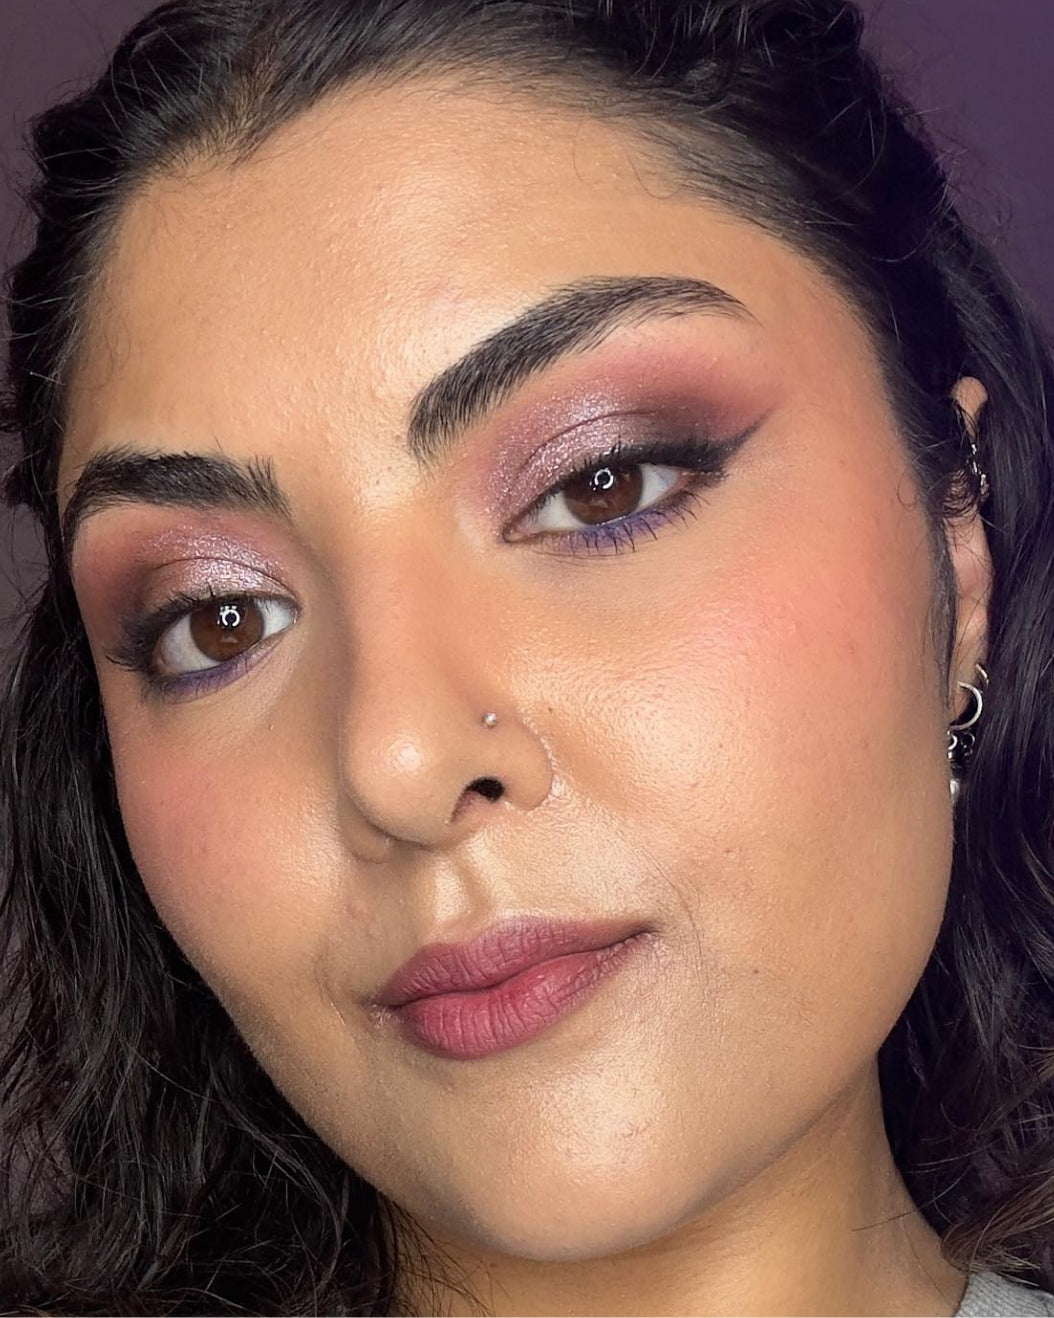 Model wears dusty rose and purple eye makeup for holiday makeup inspiration